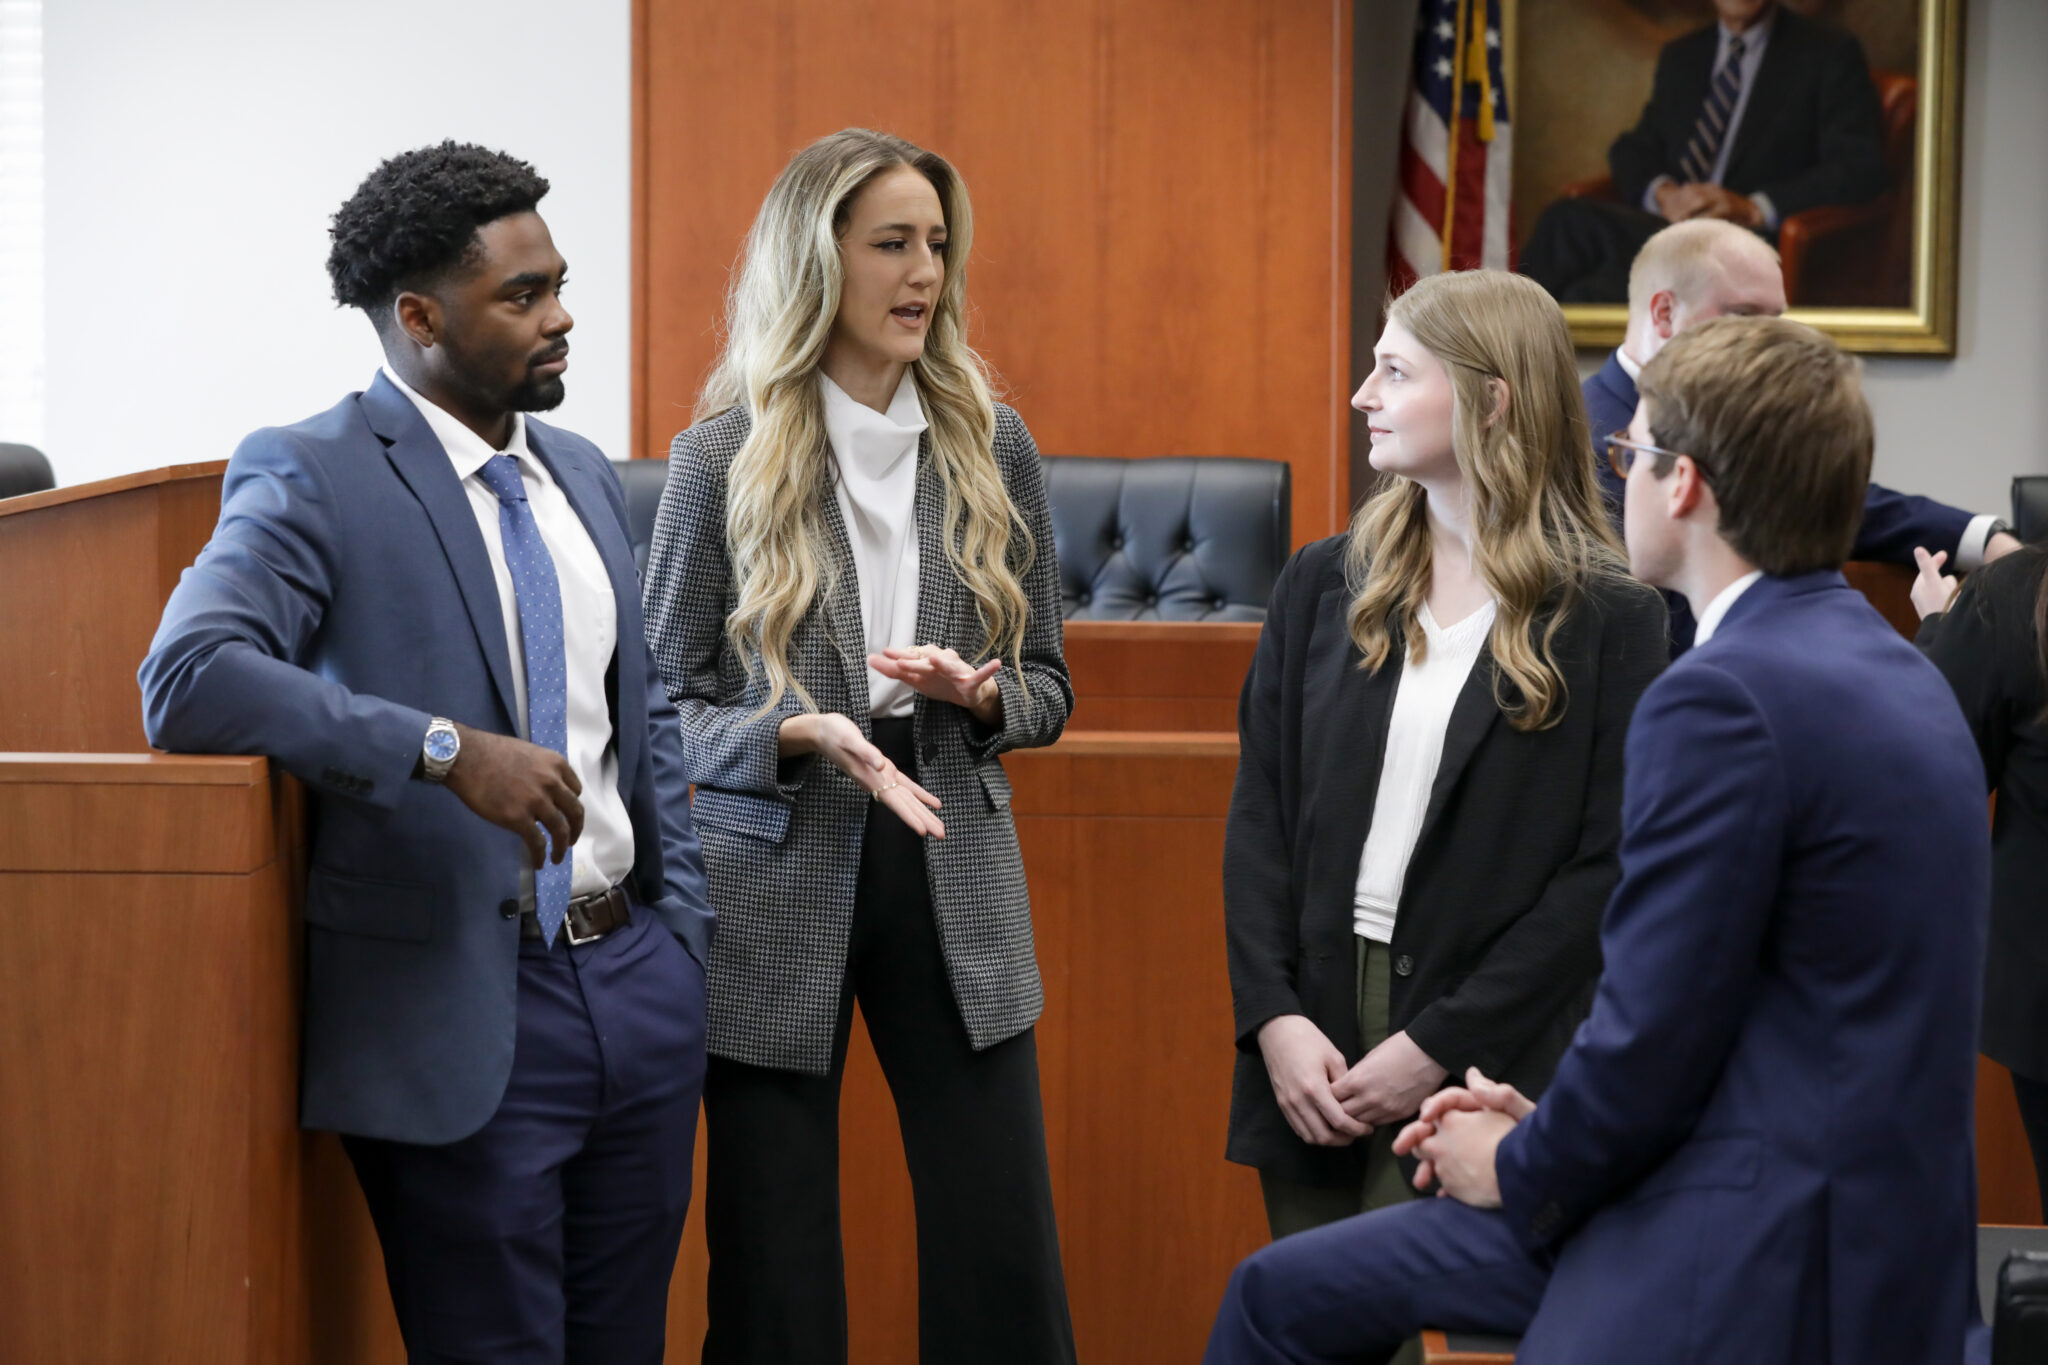 Students talking in a mock courtroom